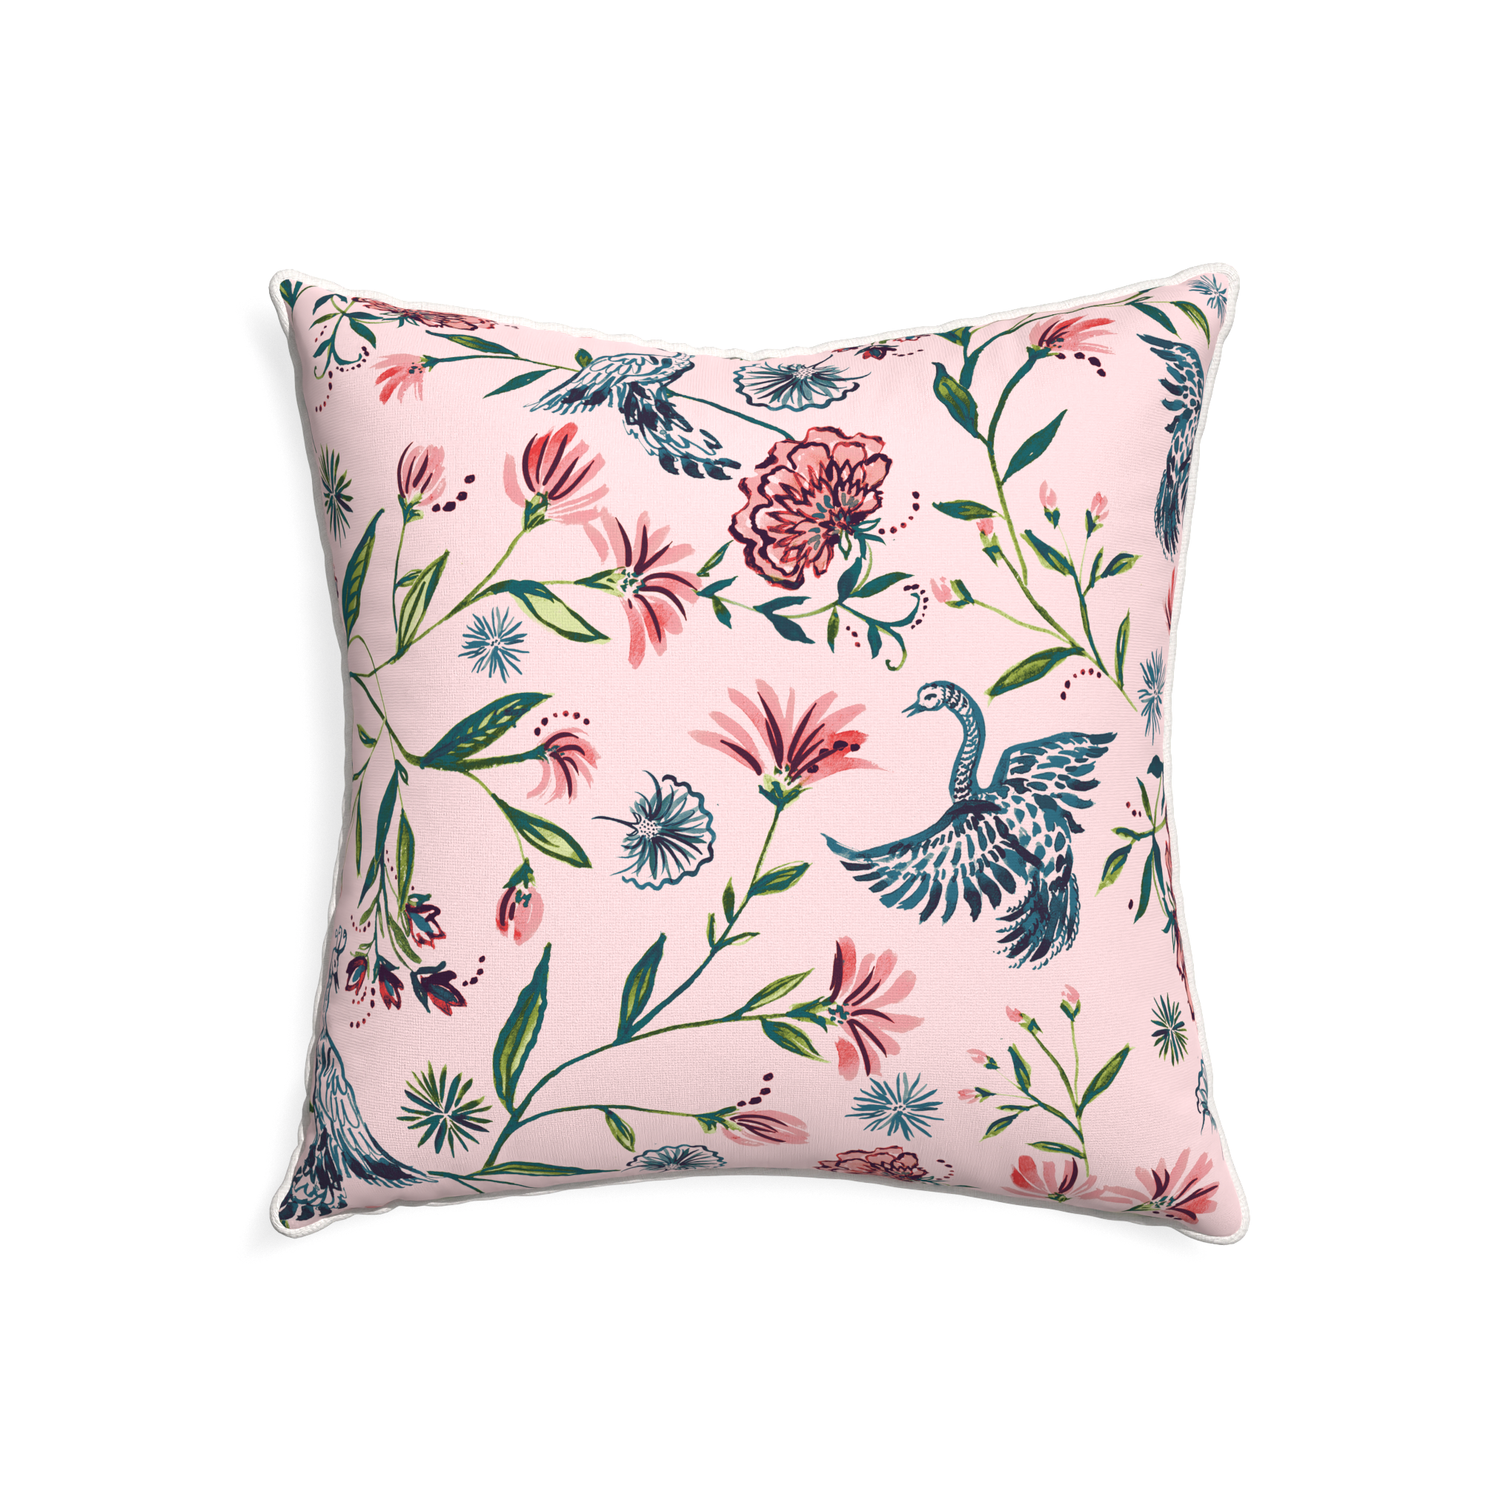 22-square daphne rose custom pillow with snow piping on white background